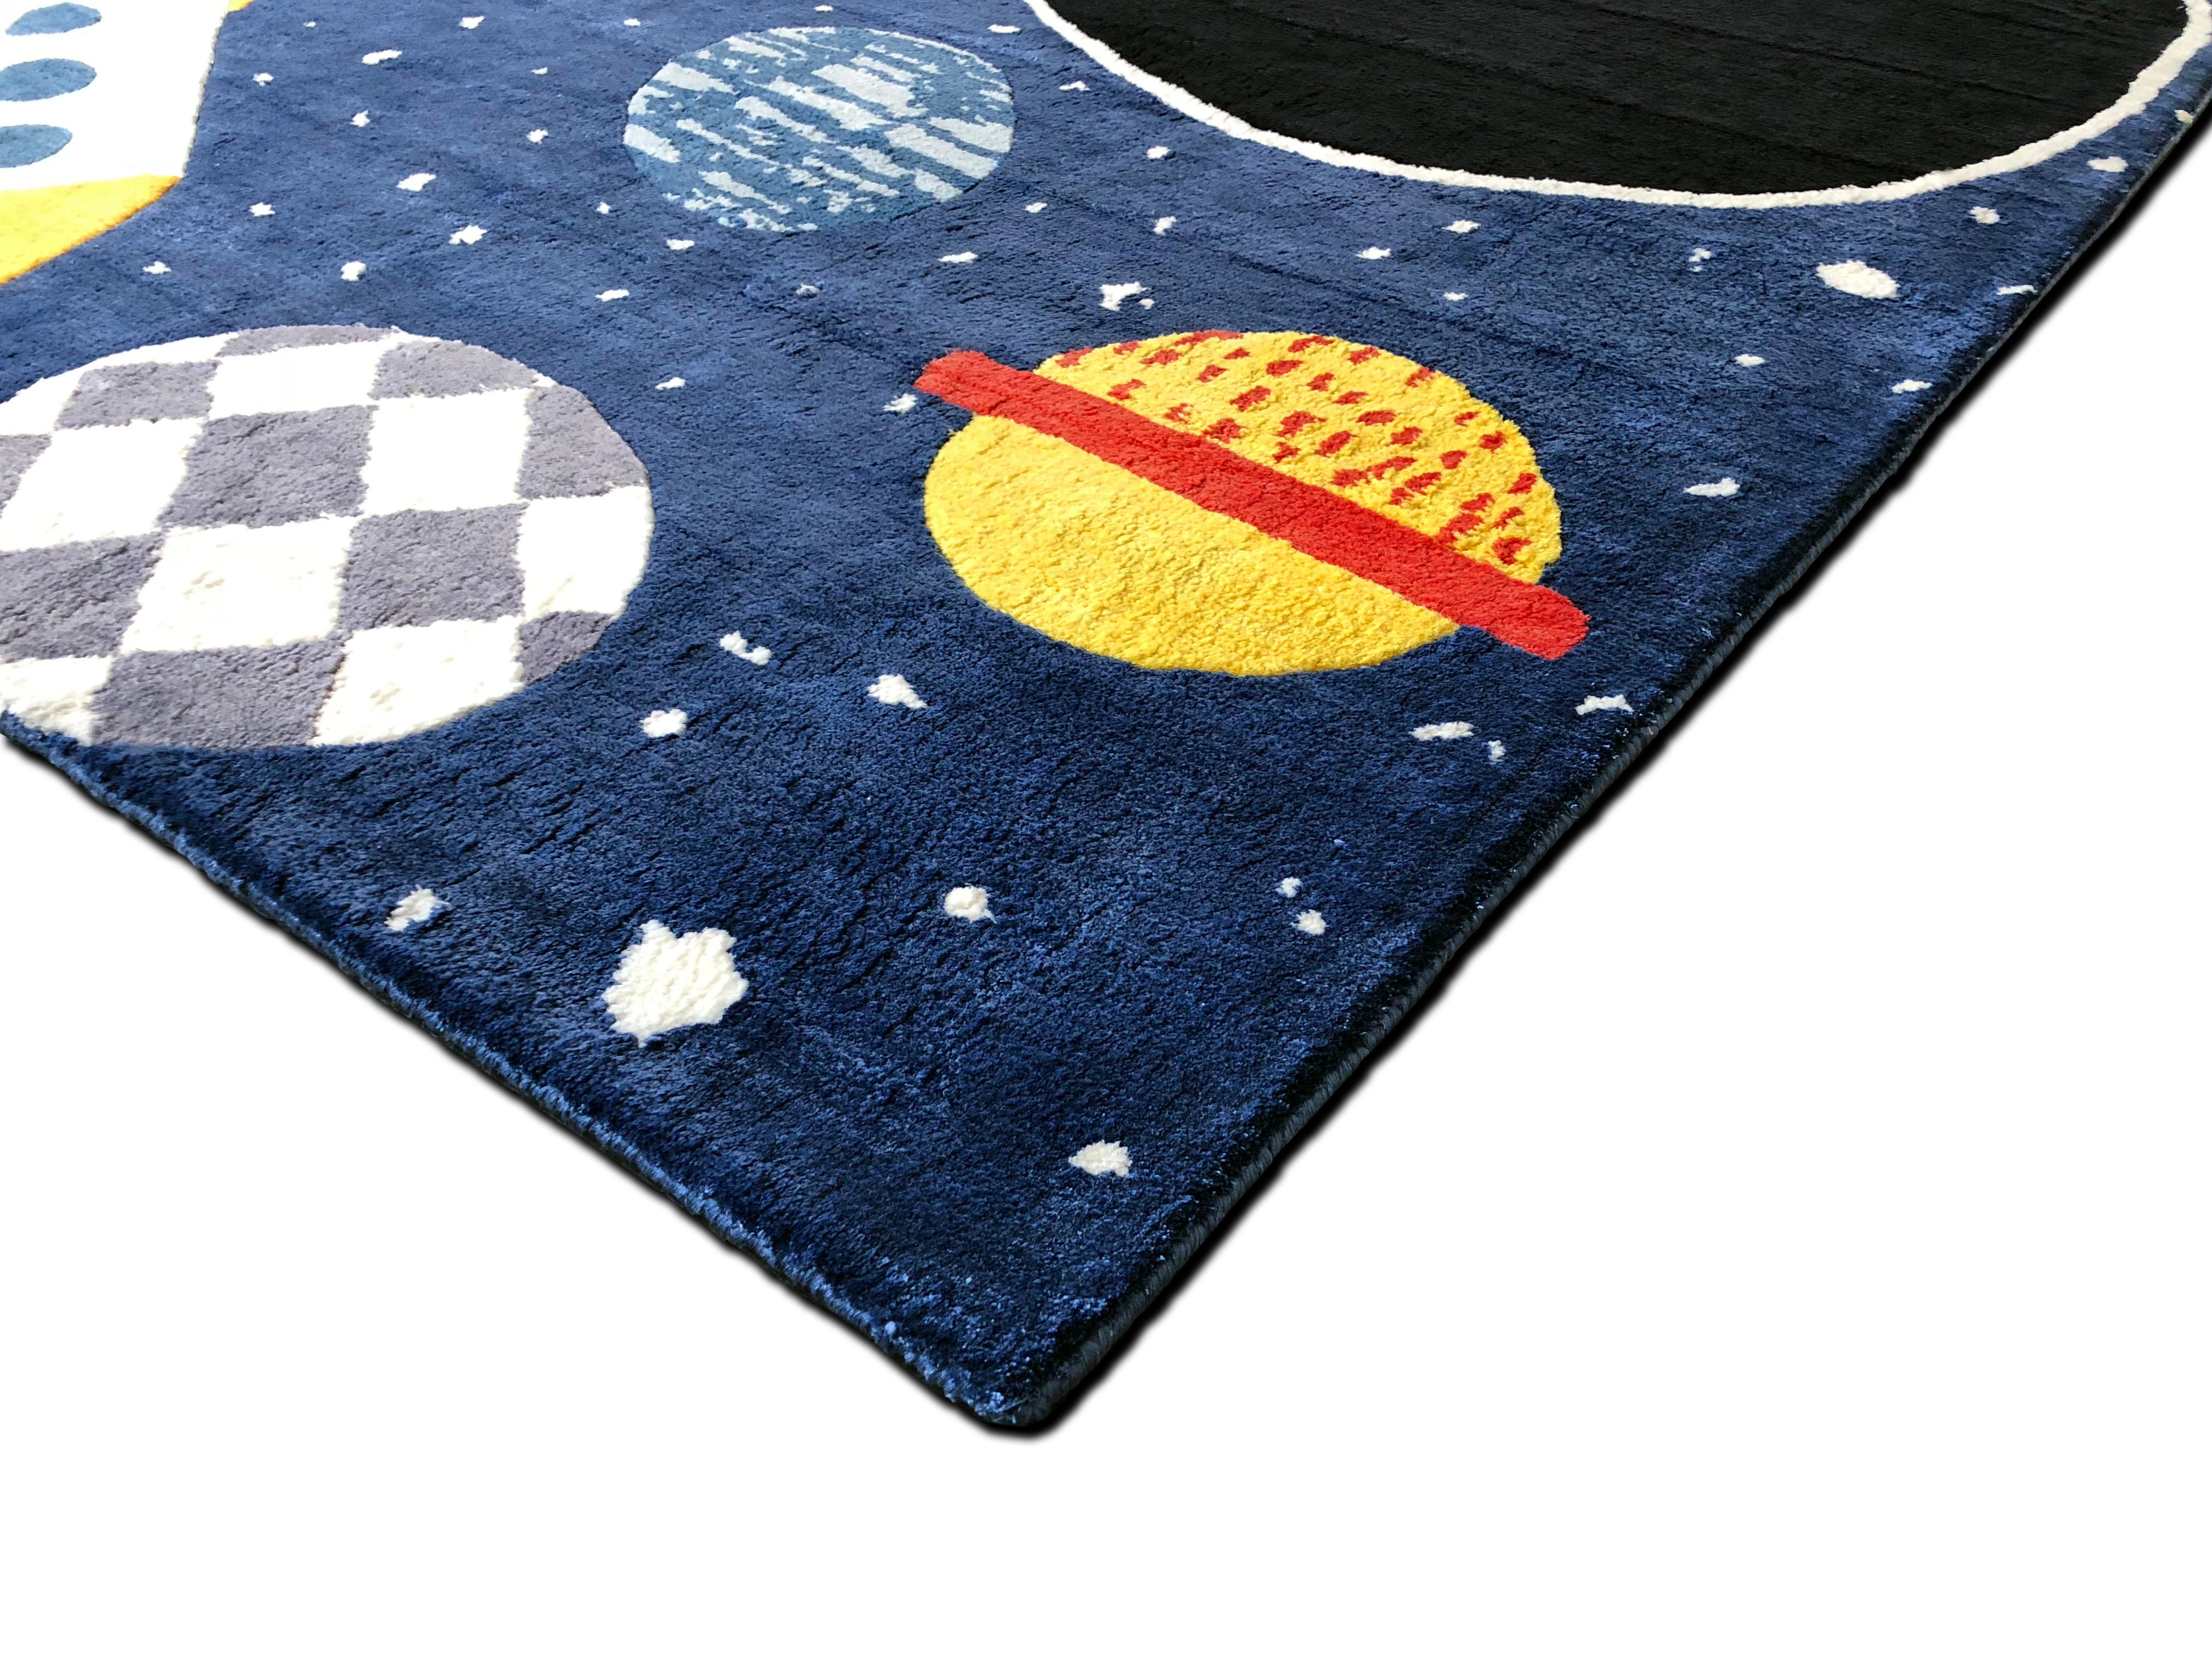 Space Ace Rug by Daria Solak, Hand Knotted, 100% New Zealand Wool 300x375cm In New Condition For Sale In London, GB